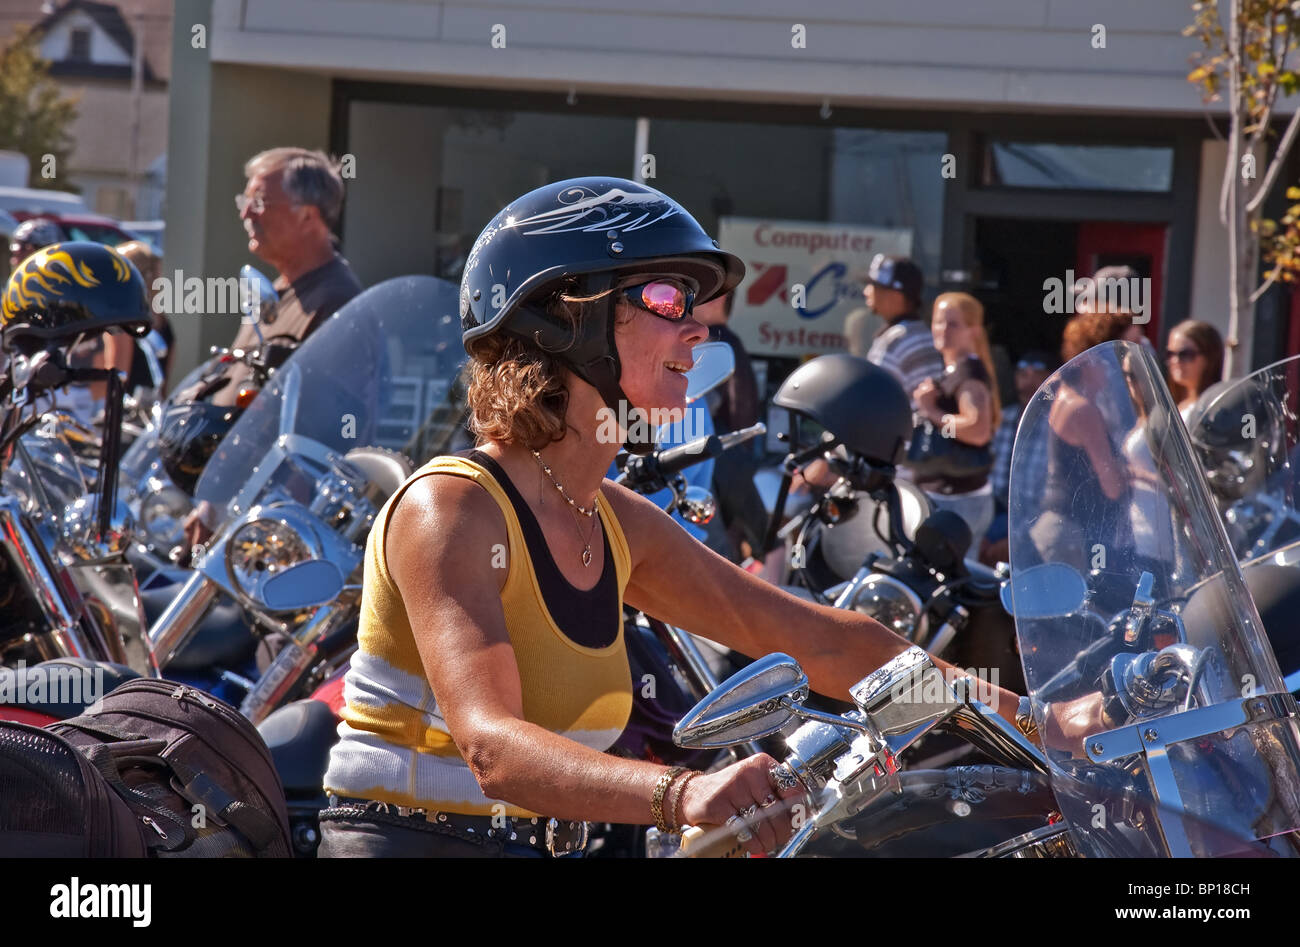 This unidentified Caucasian woman is smiling and confident as she rides her motorcycle at the annual Oyster Run motorcycle rally Stock Photo